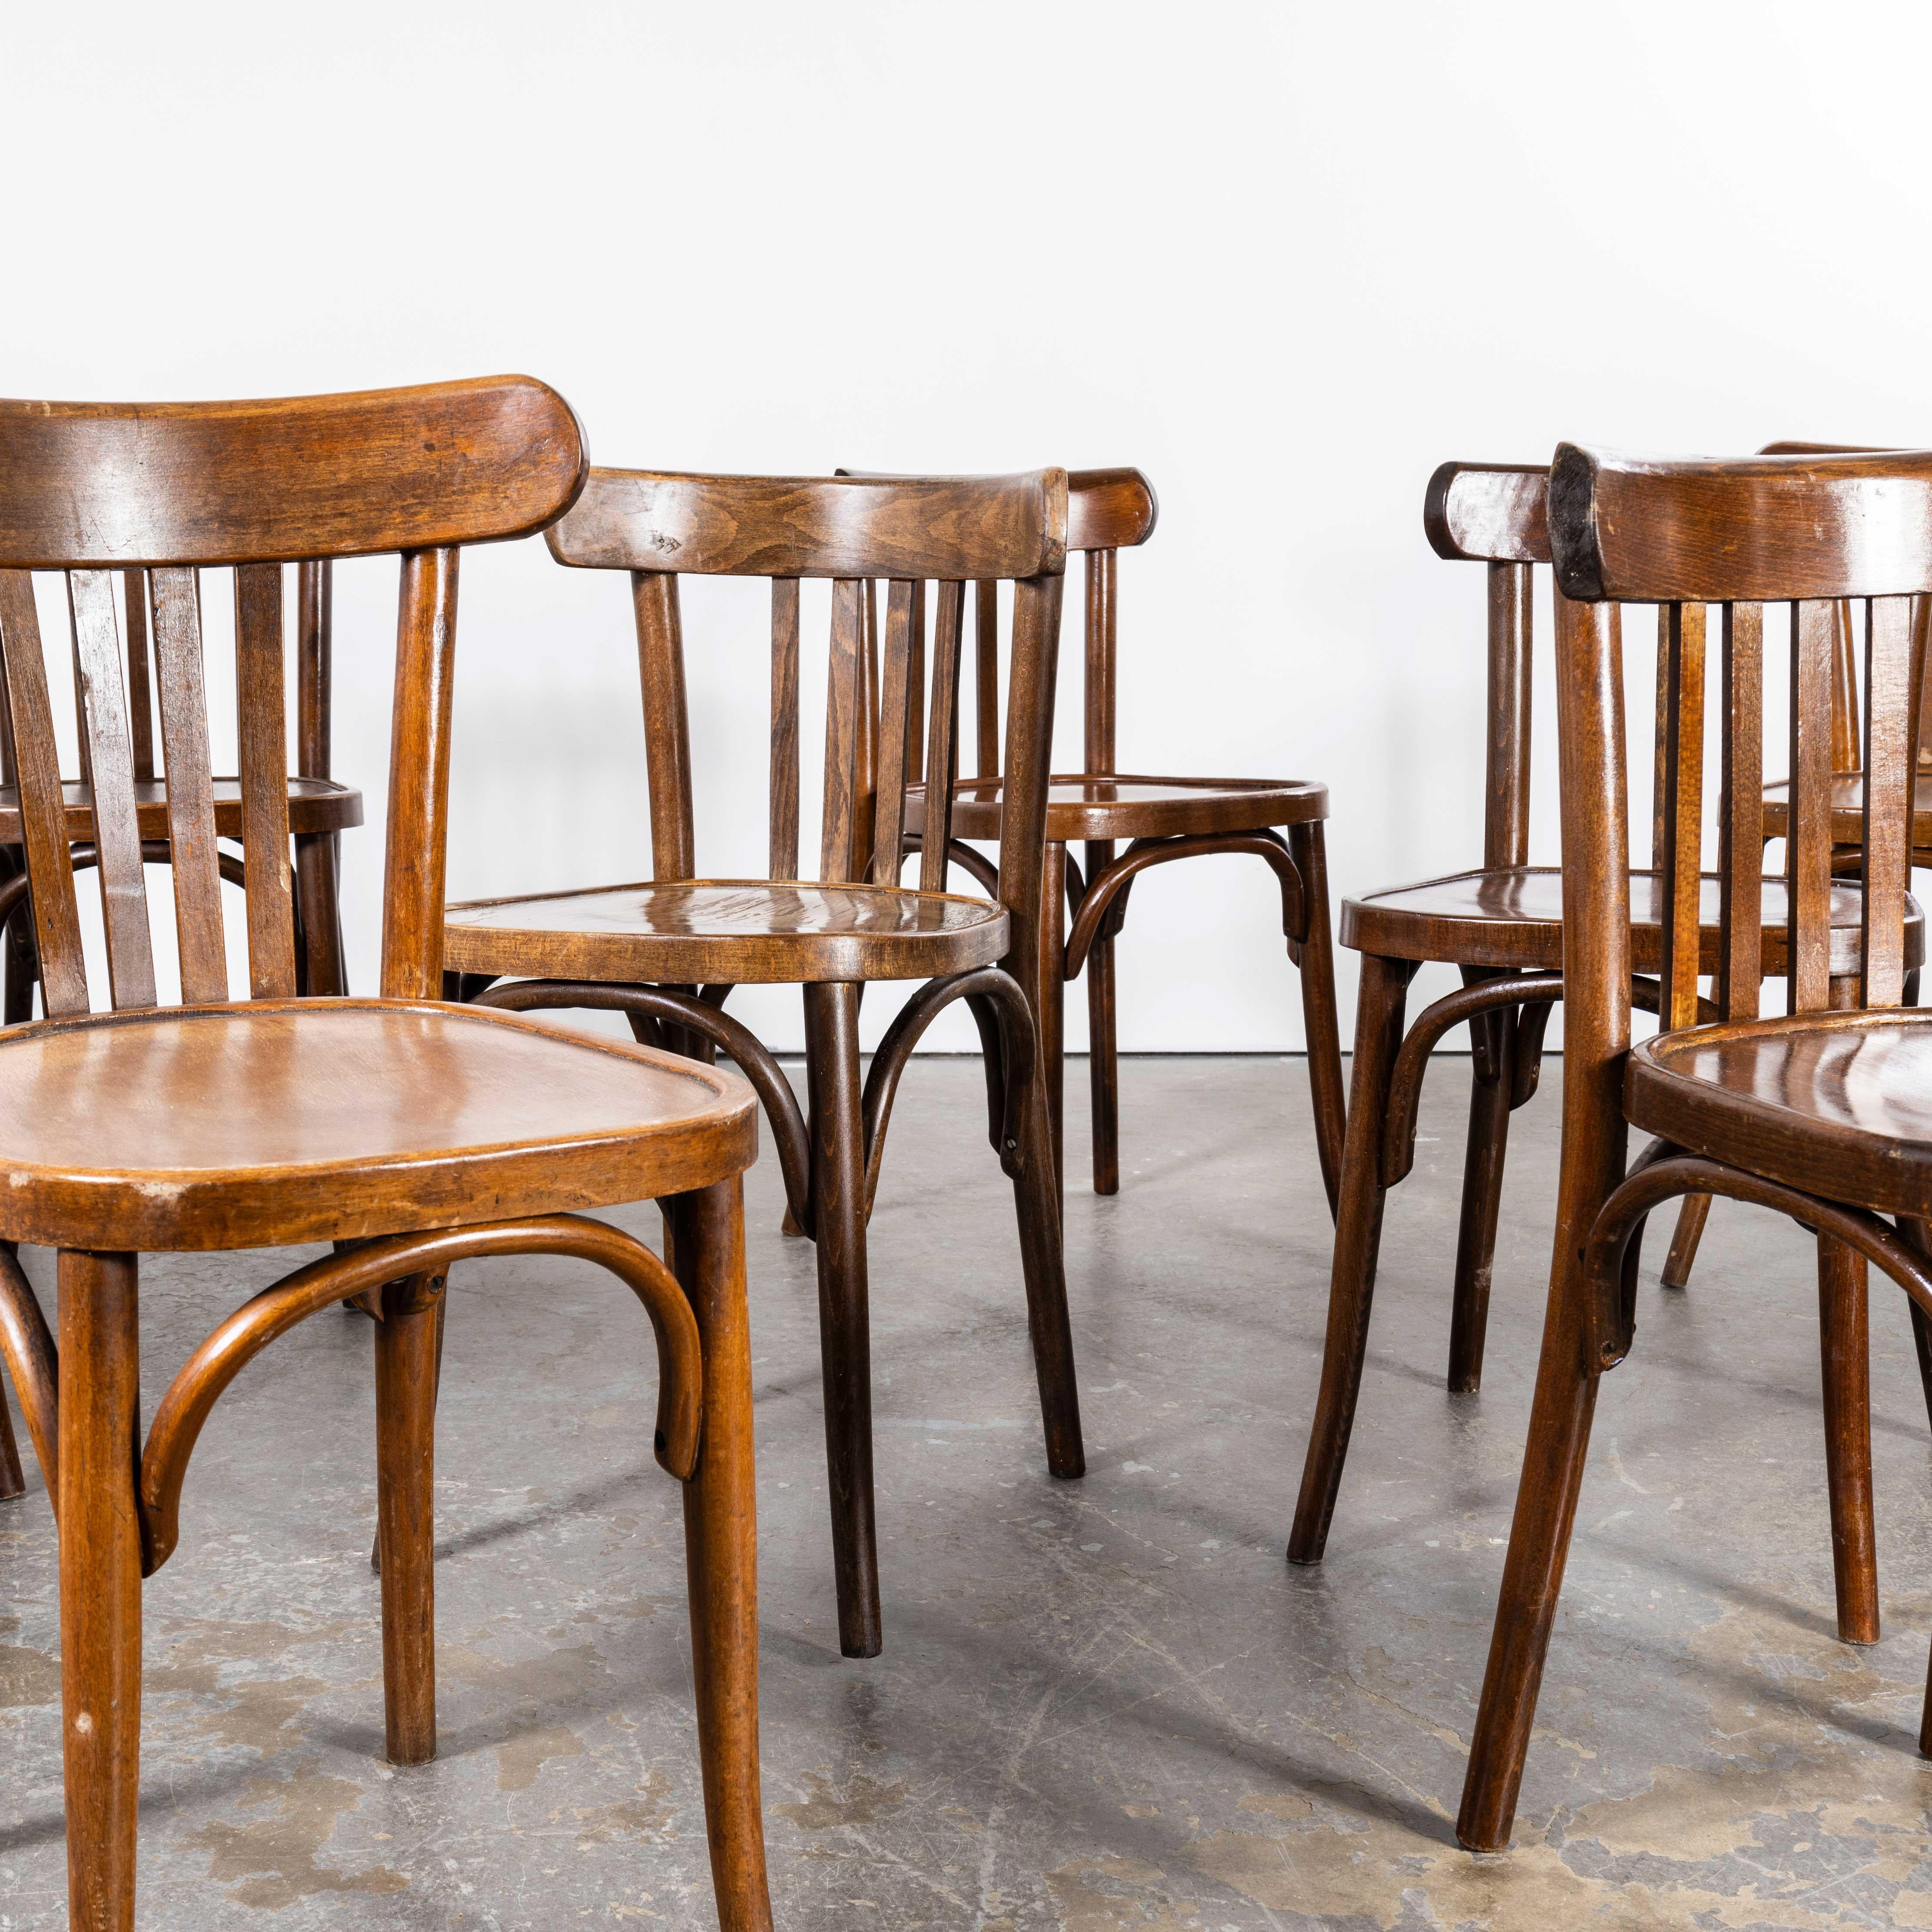 1950’s Standard Classic Bistro Mixed Dining Chairs – Large Quantities Available
1950’s Standard Classic Bistro Mixed Dining Chairs – Large Quantities Available. This listing is for what we call a ‘standard shape’ of classic bistro dining chairs.